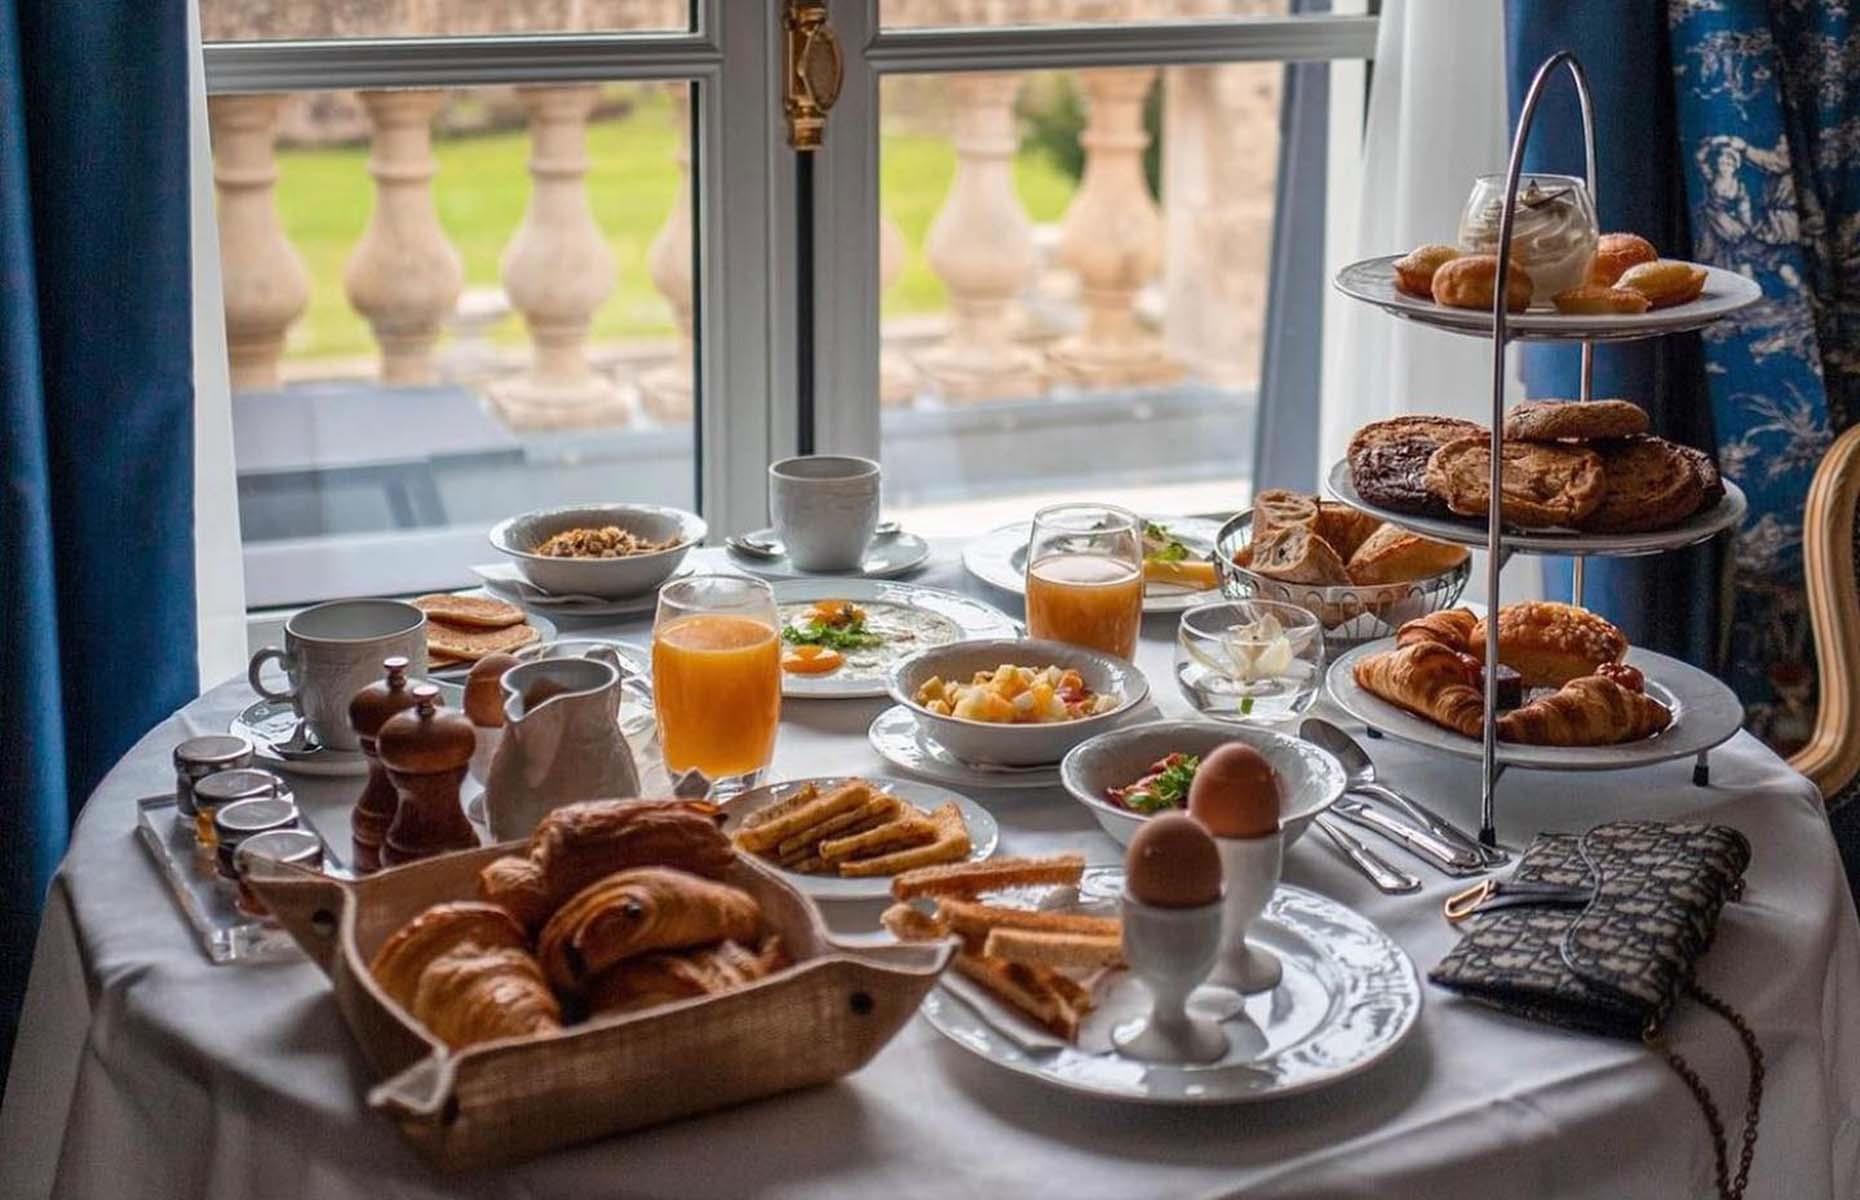 <p>Set within the grounds of an opulent château, <a href="https://aubergedujeudepaumechantilly.fr/">Auberge du Jeu de Paume</a> unsurprisingly delivers a breakfast fit for royalty. You have to pay extra for the privilege, but when previous visitors consistently rave about the breakfast, something makes us think it’s worth the splurge. It's a decadent continental buffet affair, covering all the usual suspects that can either be enjoyed in the comfort of your room, on the private terrace of your suite or in the hotel’s marble-floored restaurant.</p>